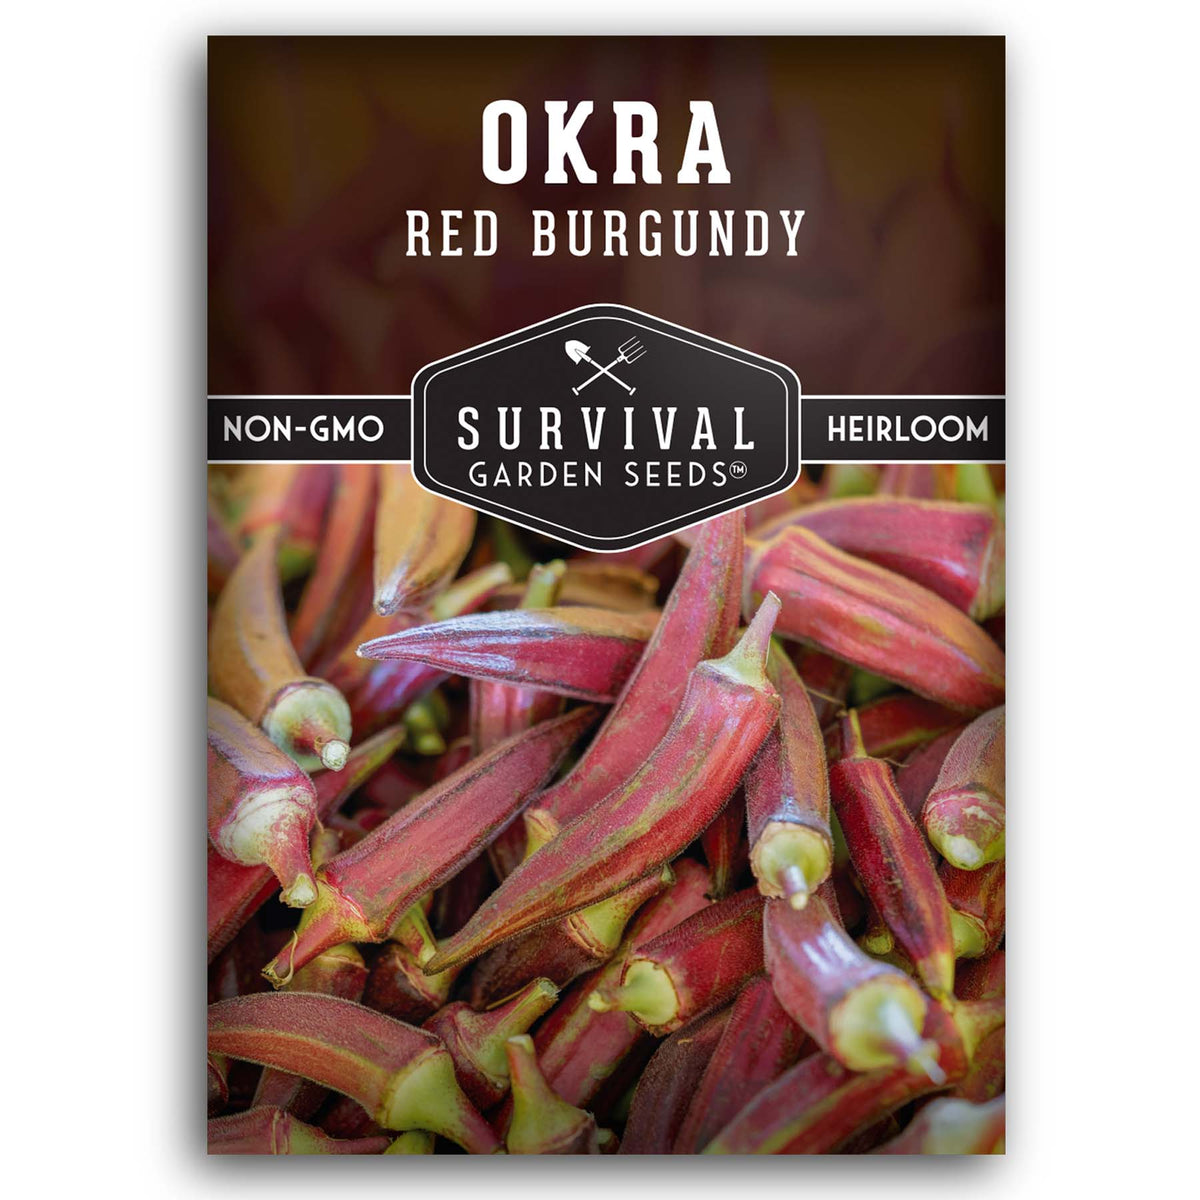 Red Burgundy Okra Seed for planting